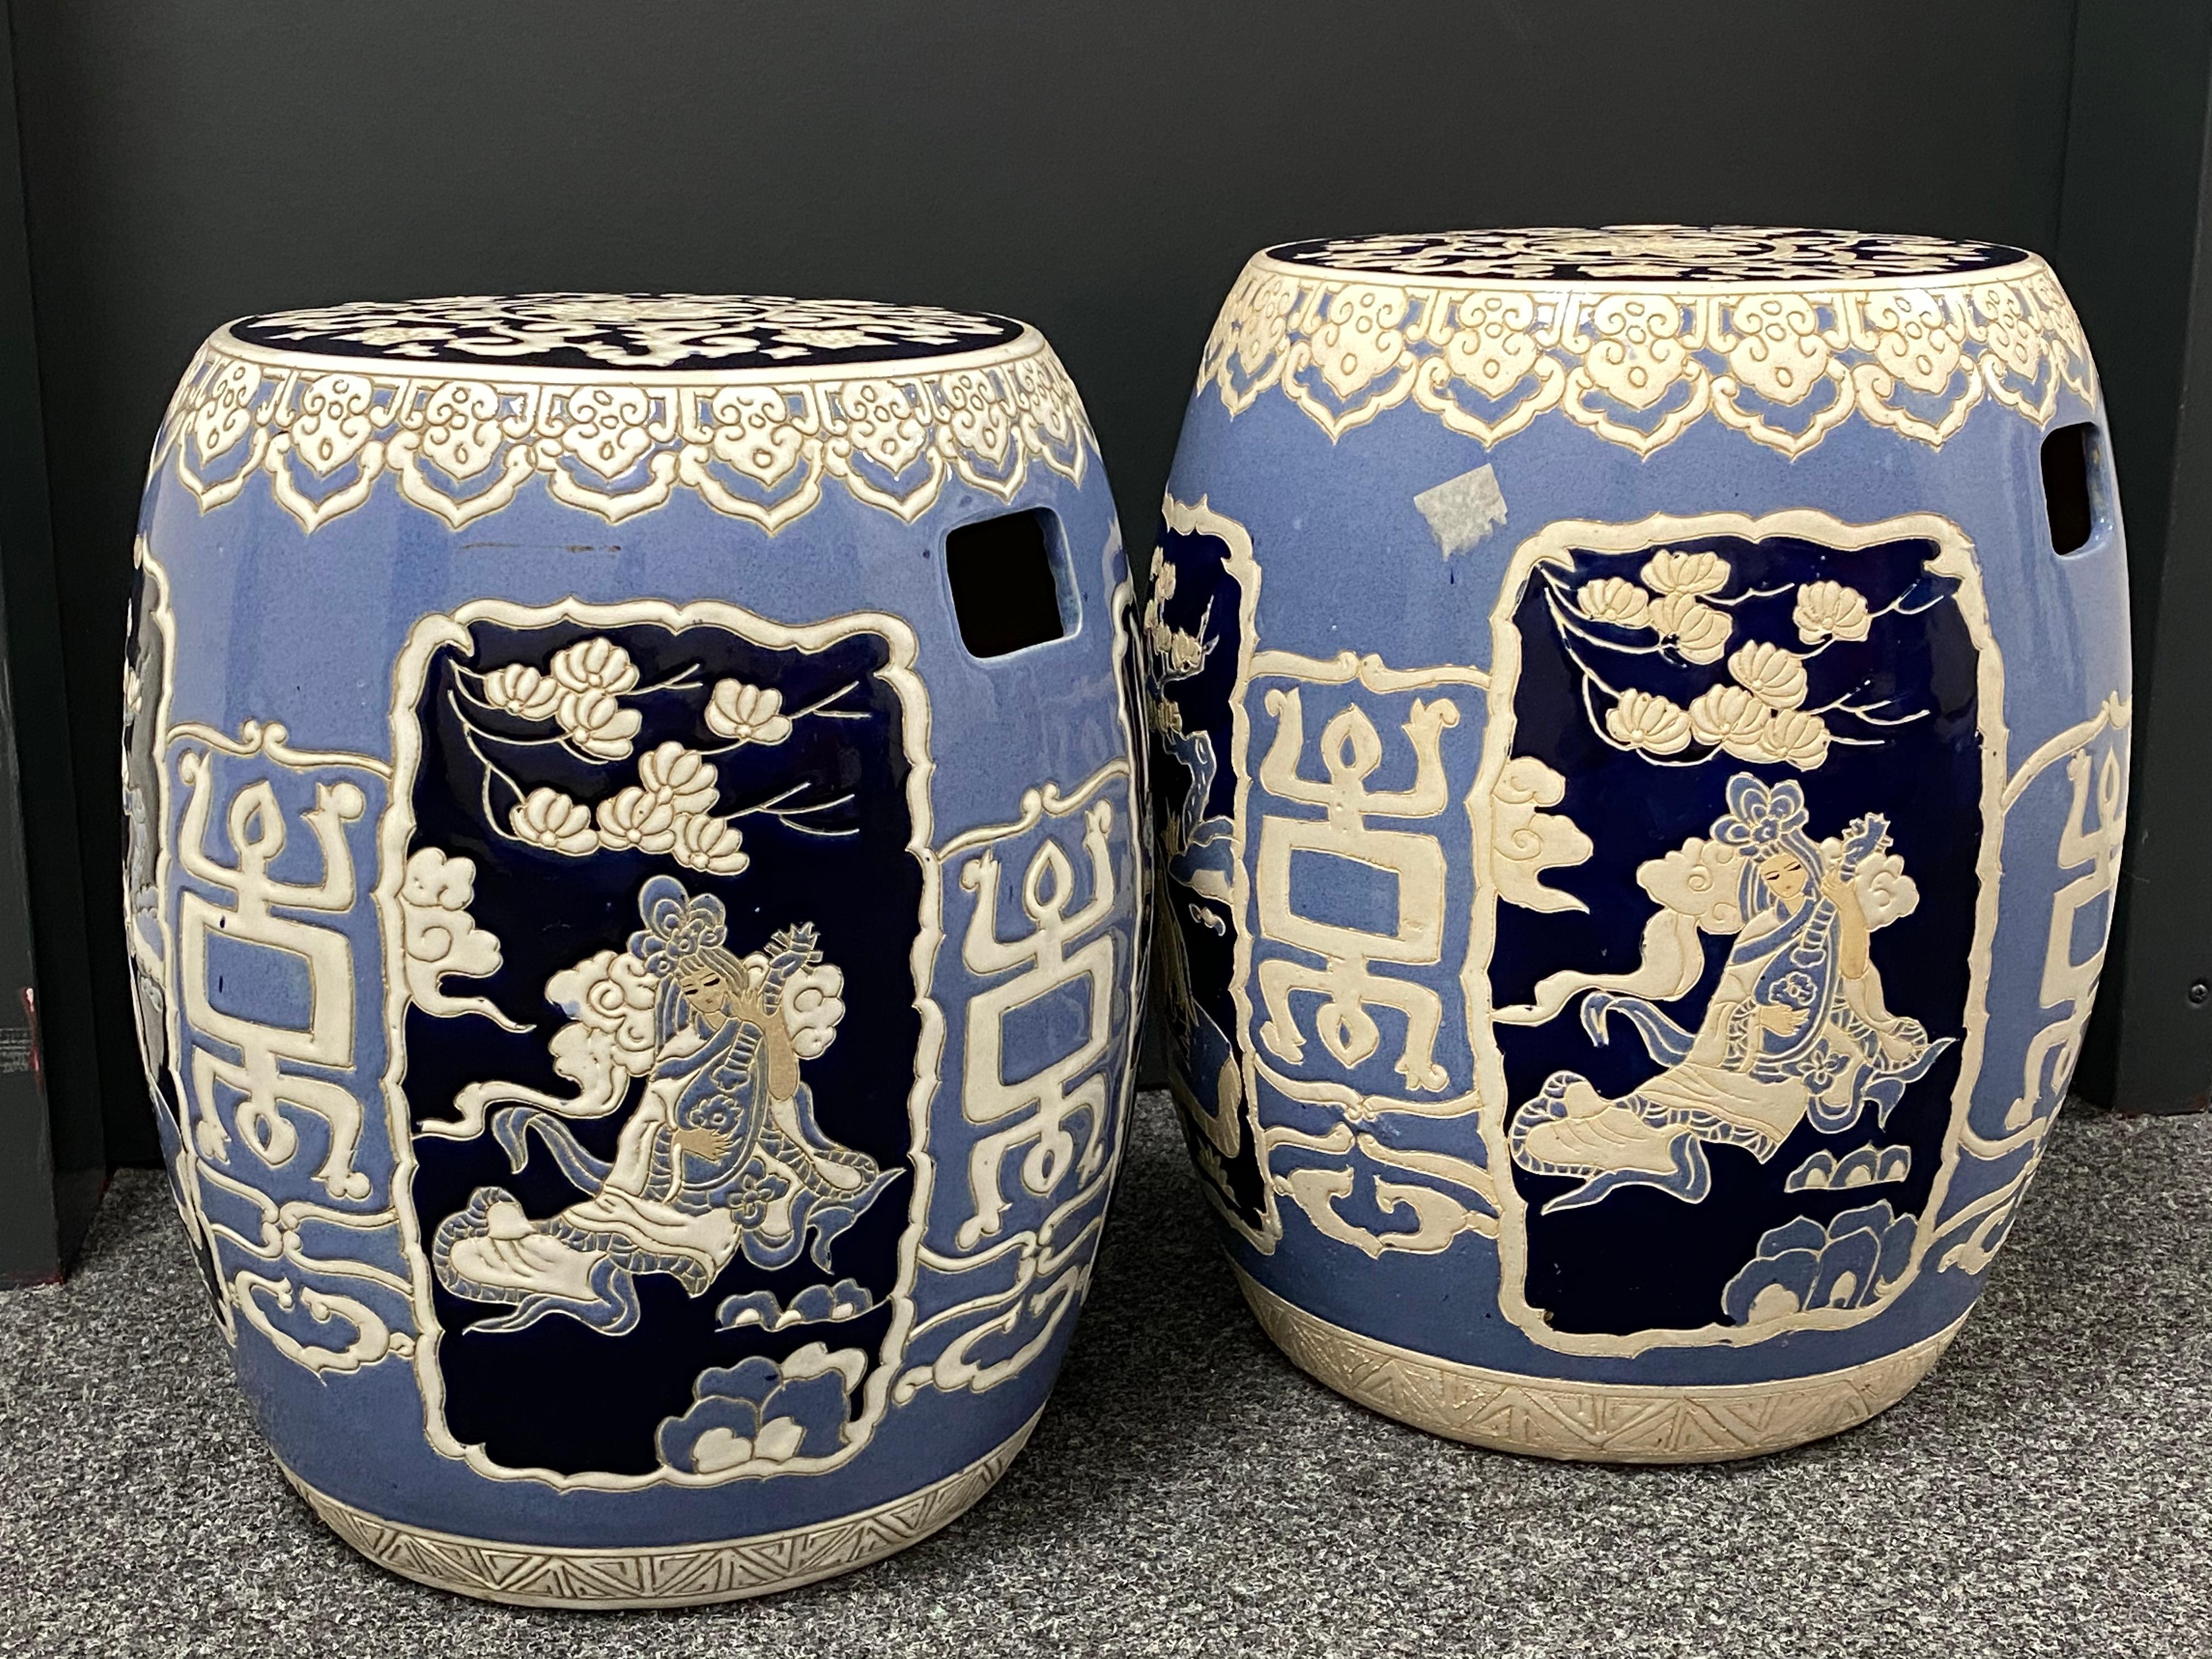 A pair of mid-20th century chinoiserie blue and white hand painted ceramic garden stool or flower pot seat. The landscape surrounding an 18th century Hampshire estate inspired this traditional outdoor ceramic garden stool. An instant demarcation of